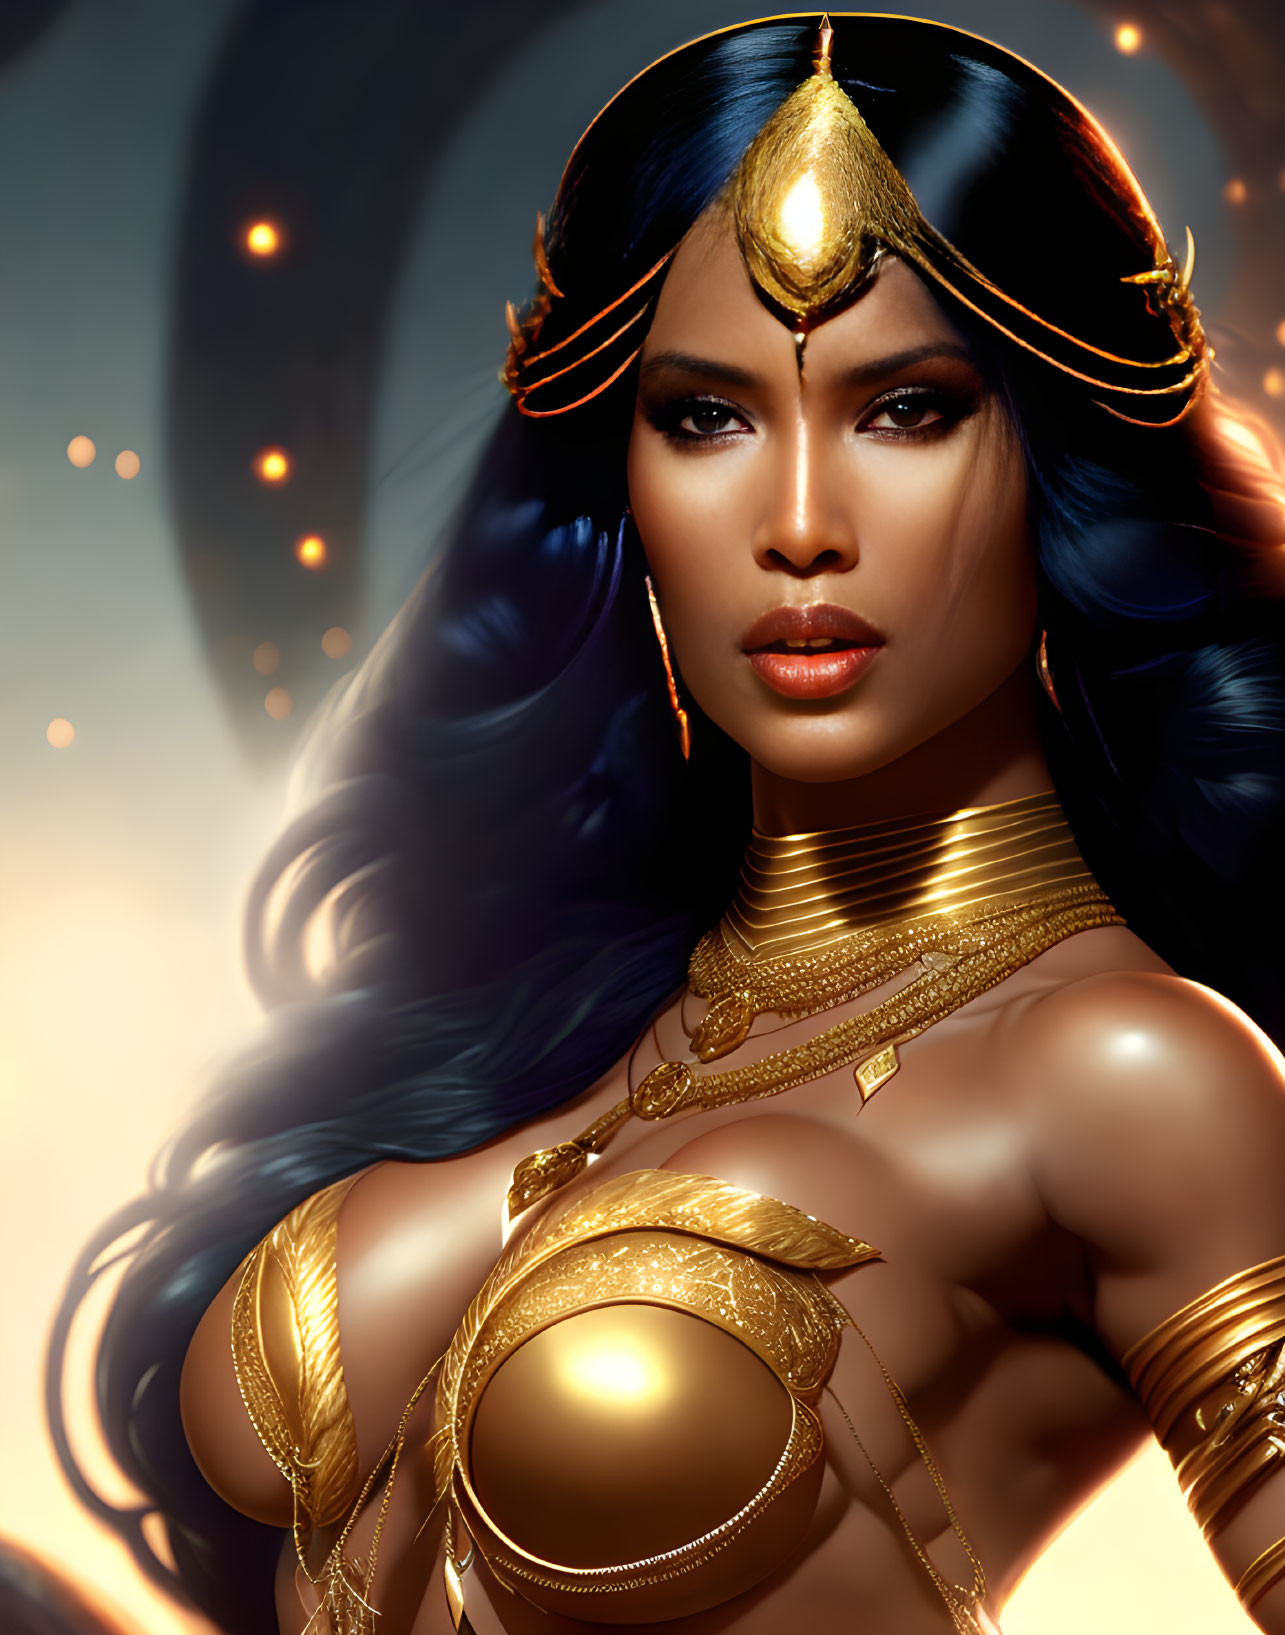 Golden armored woman with headdress in mystical setting